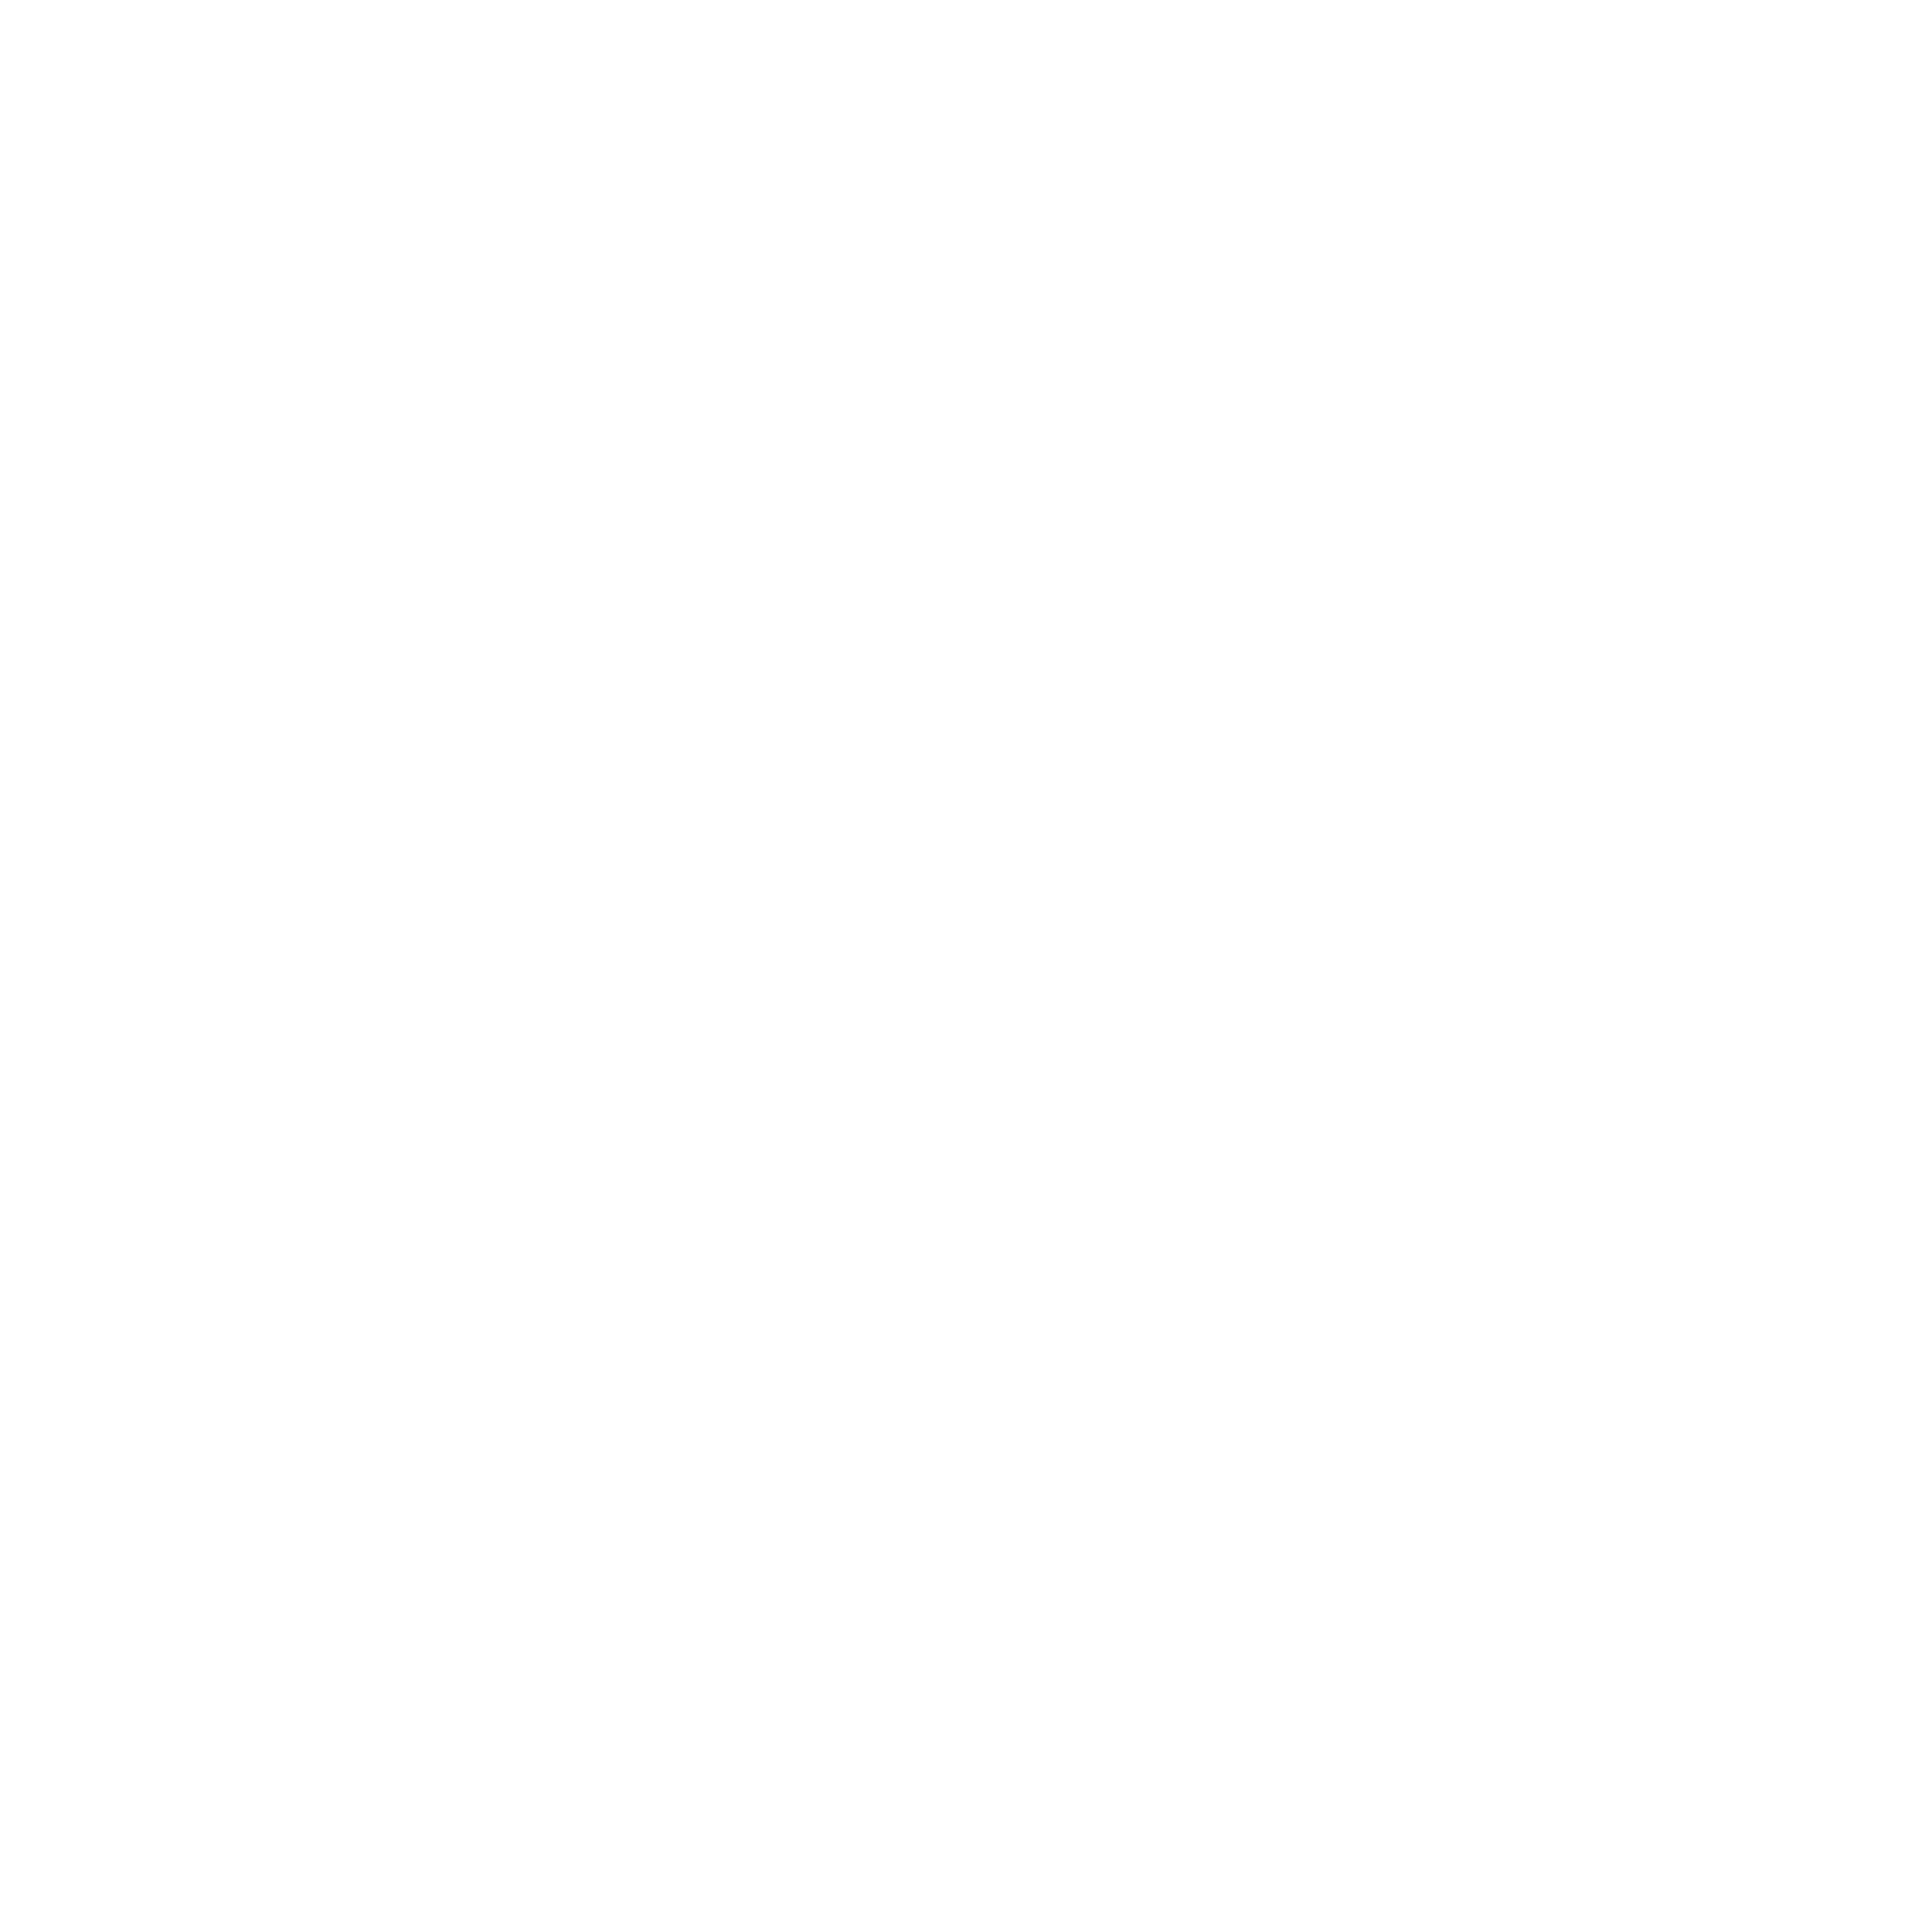 glaucus-logo-white.png